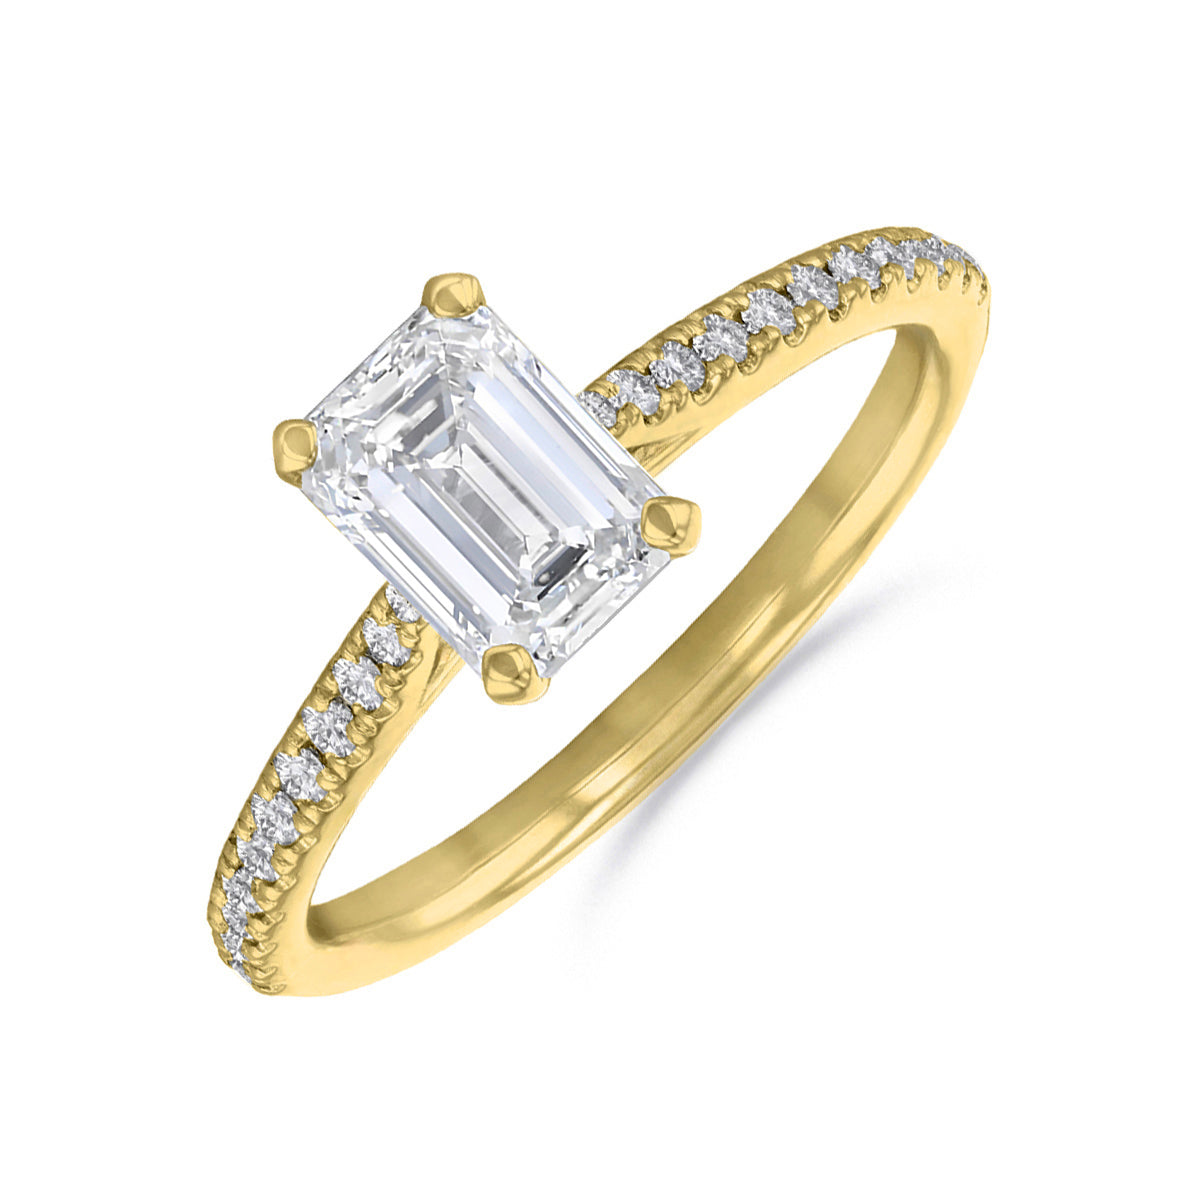 0-25ct-ophelia-shoulder-set-emerald-cut-solitaire-diamond-engagement-ring-18ct-yellow-gold